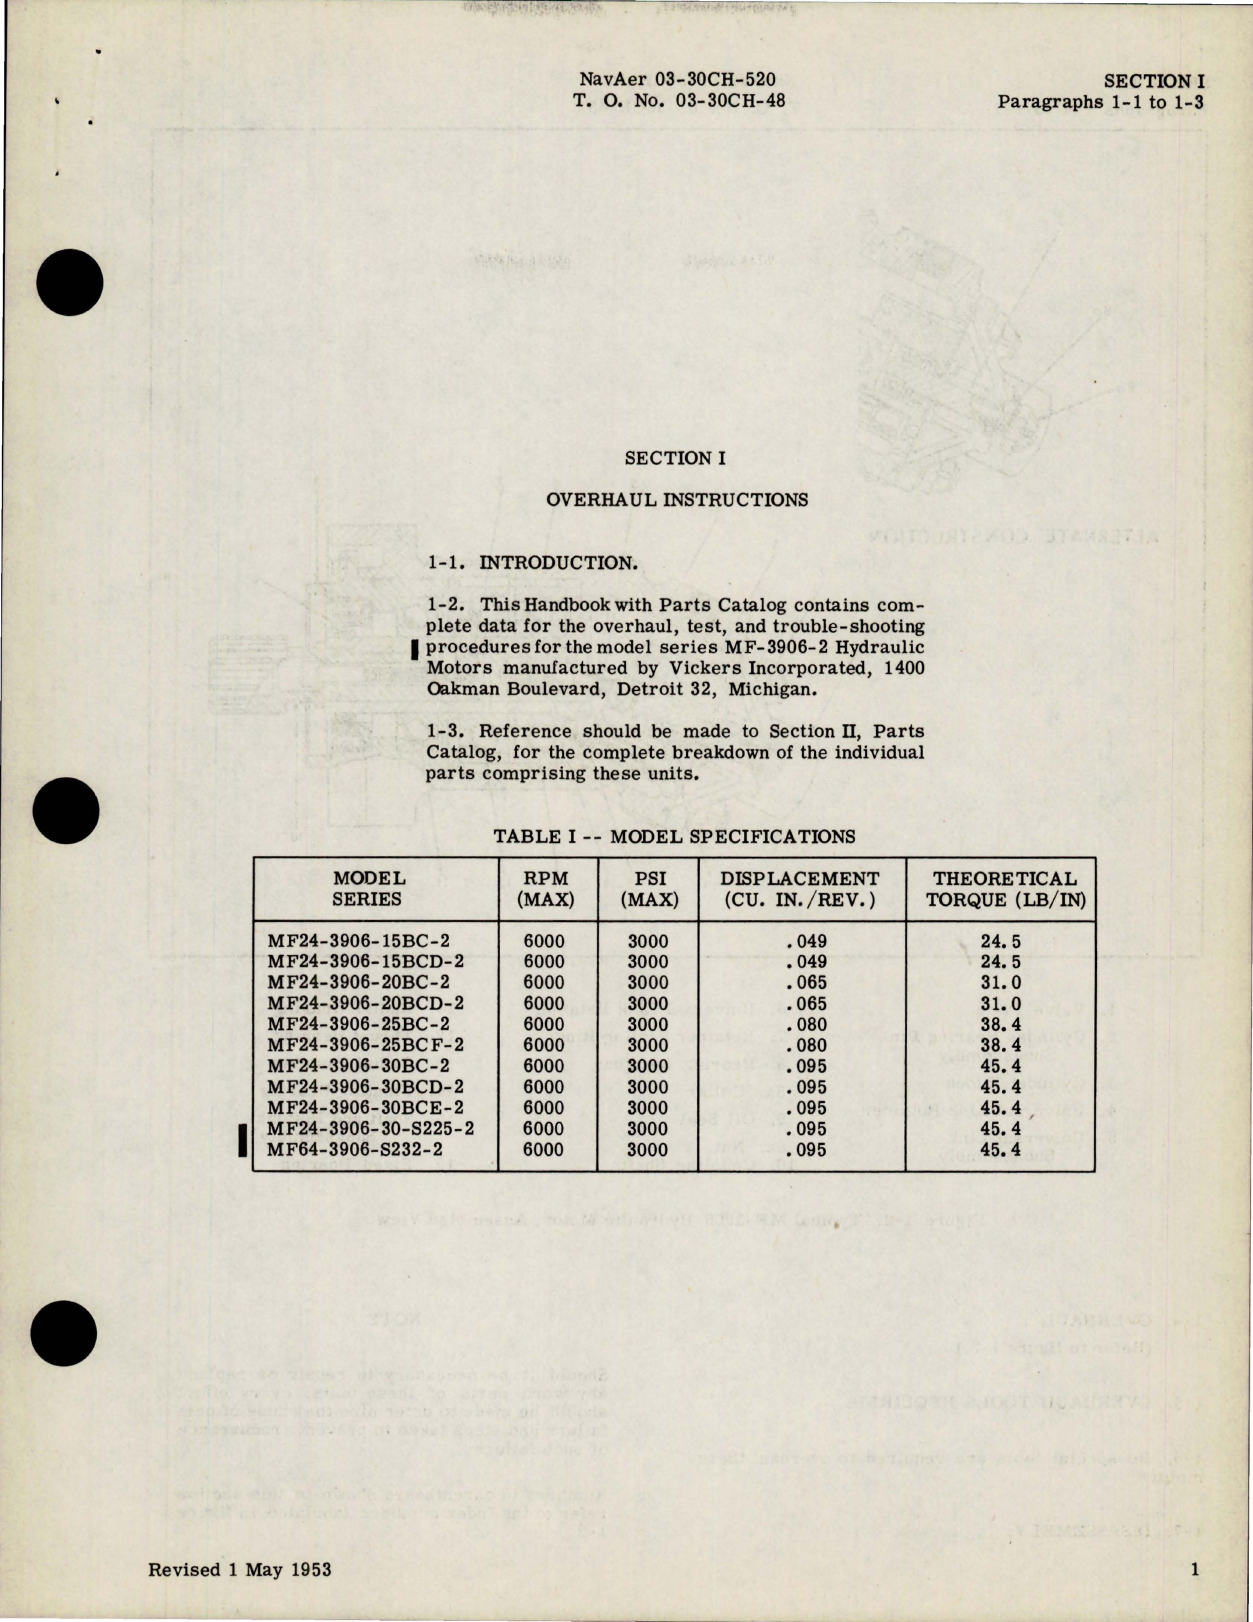 Sample page 5 from AirCorps Library document: Overhaul Instructions with Parts Catalog for Hydraulic Motors - Models MF-3906-2 Series 